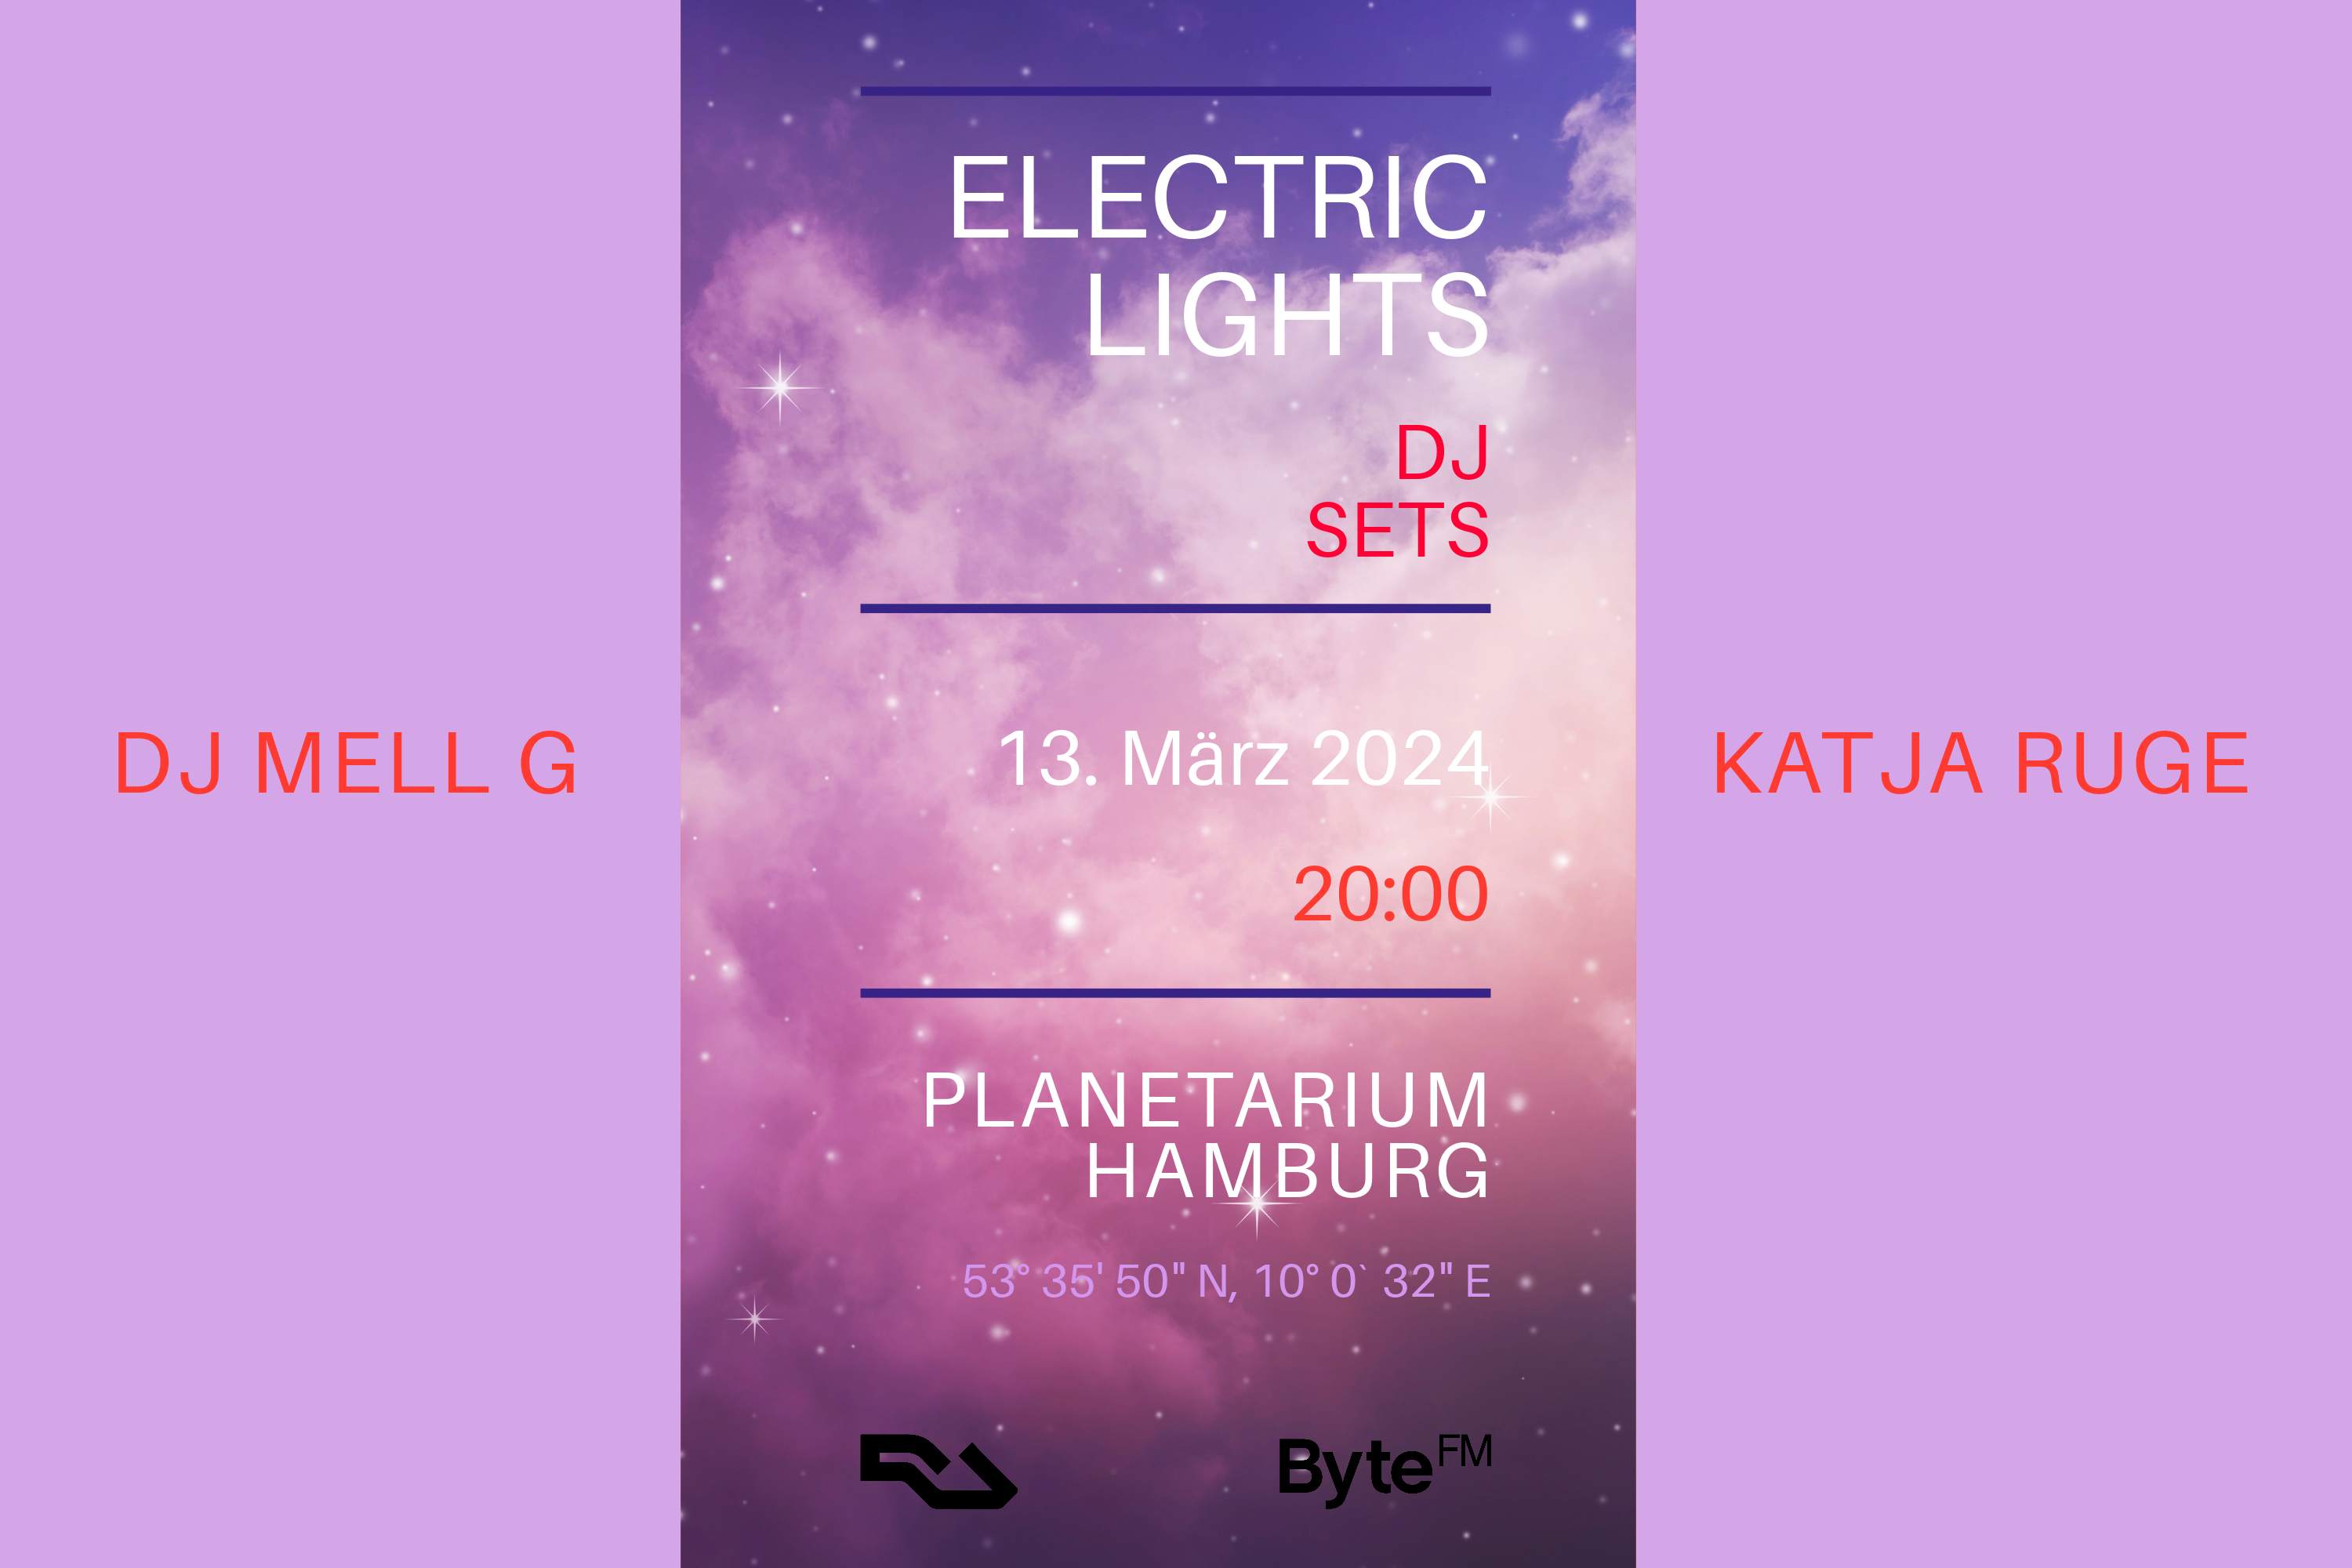 Electric Lights - Women in Electronic Music - Vol 2 - DJ MELL G & Katja Ruge - フライヤー表